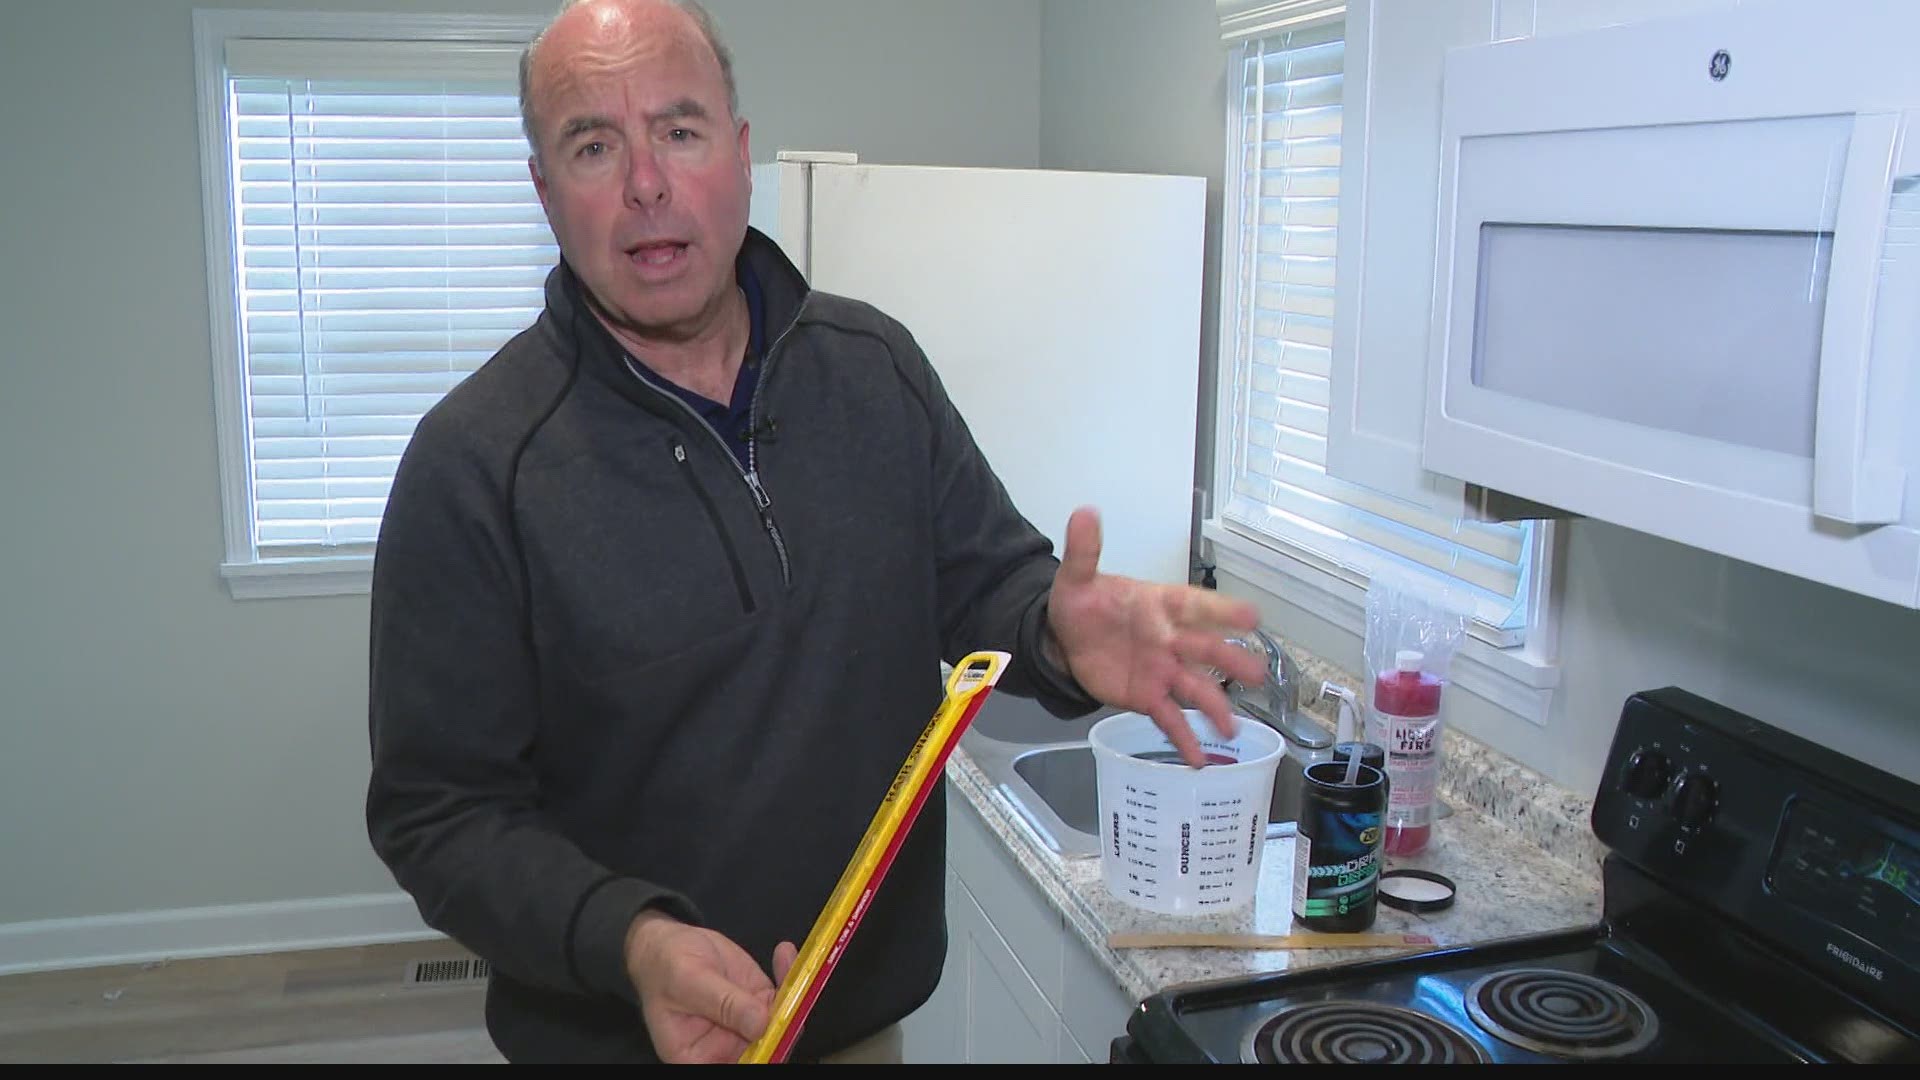 As you prepare for the holidays, Pat Sullivan provides some advice on preparing your home's fixtures, too.